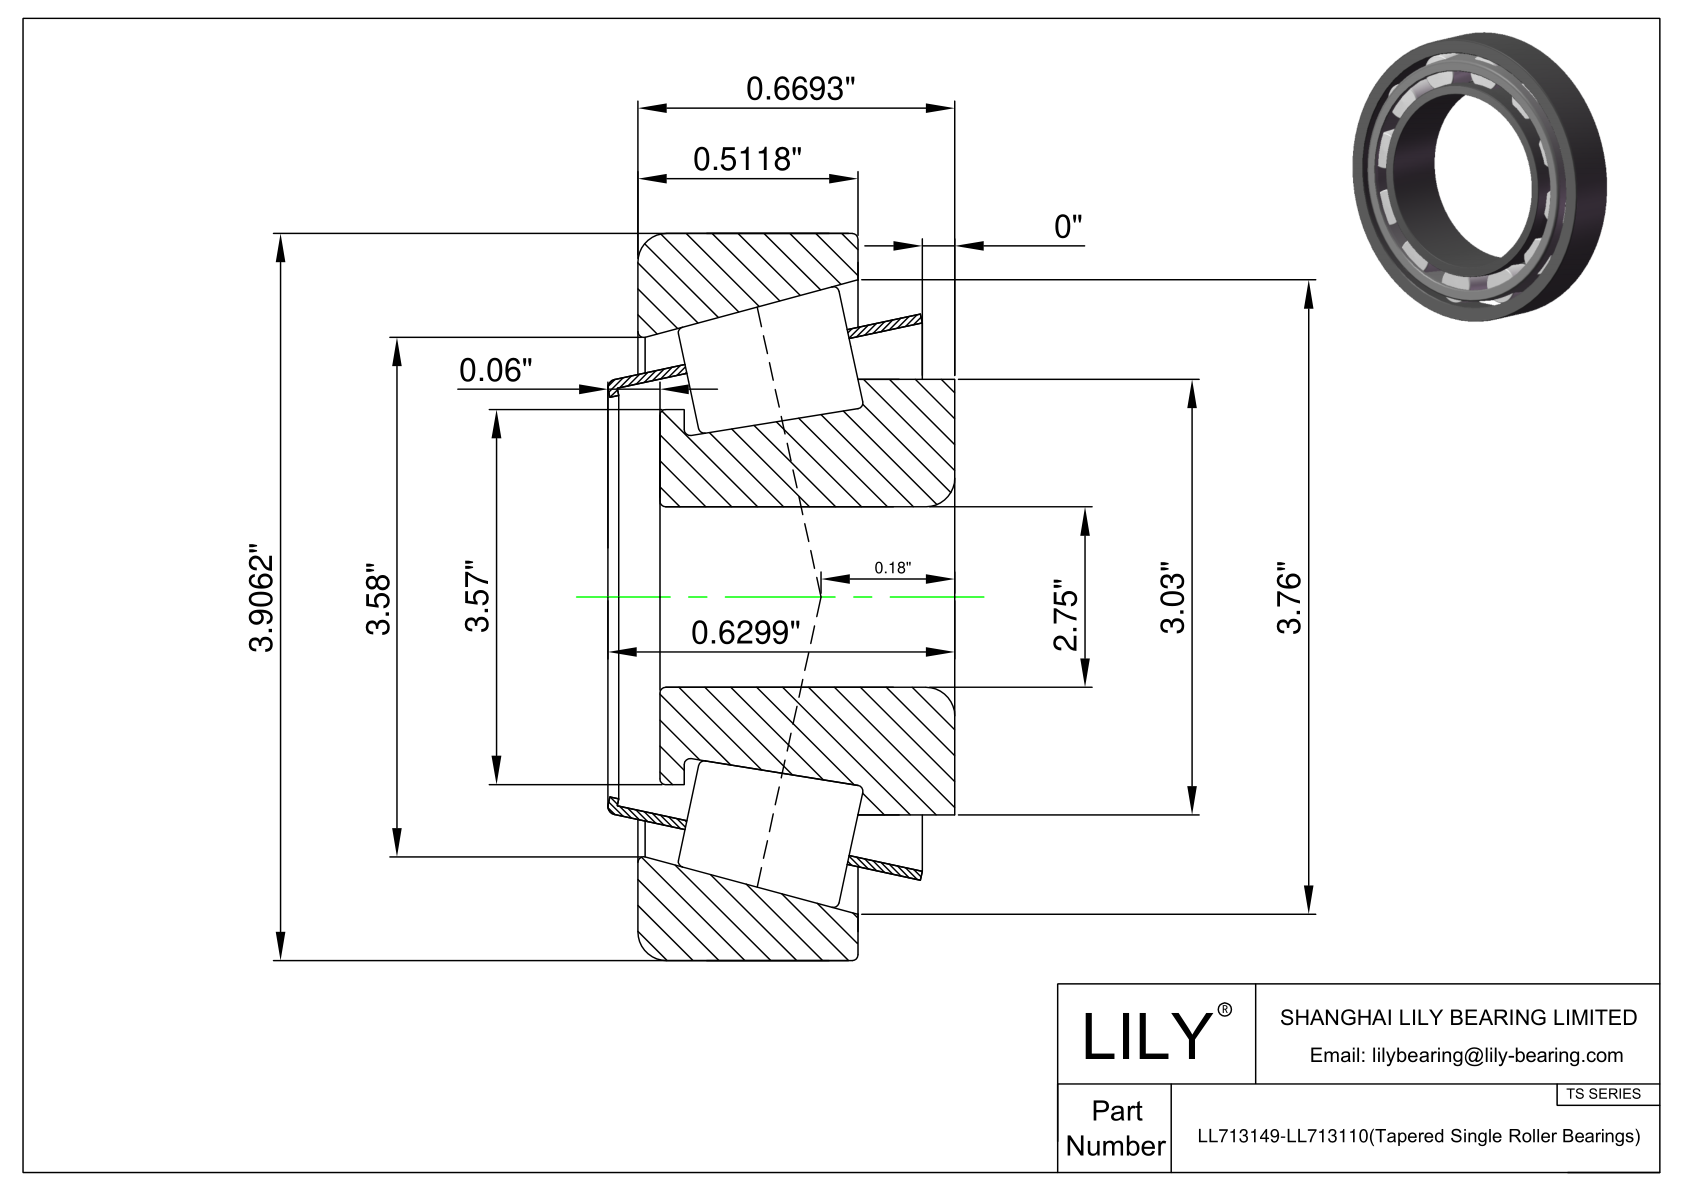 LL713149-LL713110 TS (Tapered Single Roller Bearings) (Imperial) cad drawing